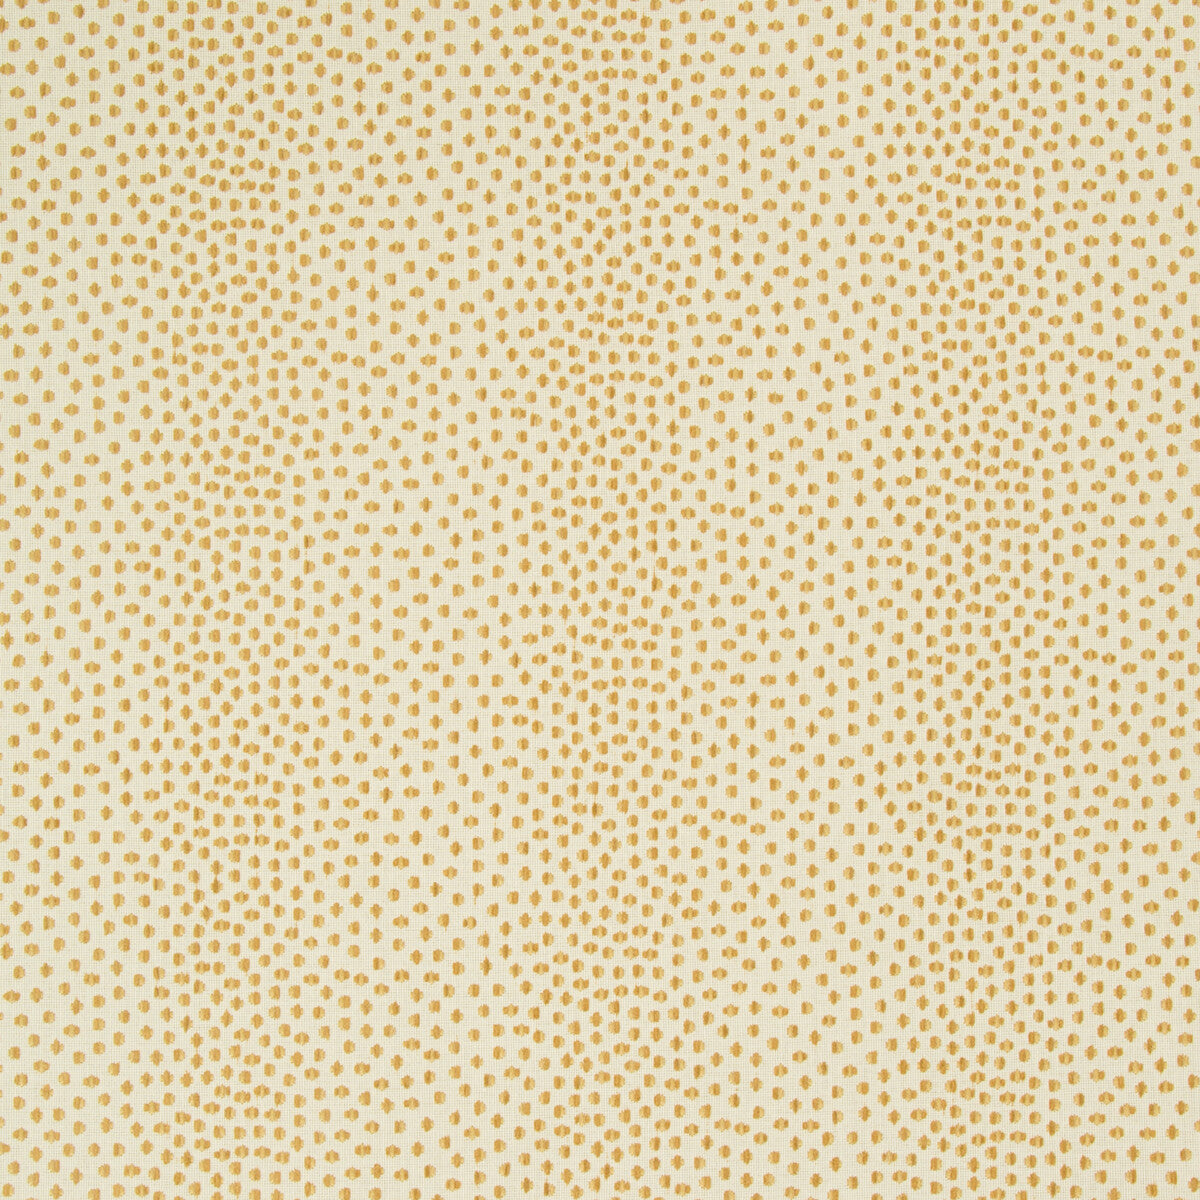 Kravet Contract fabric in 34748-16 color - pattern 34748.16.0 - by Kravet Contract in the Crypton Incase collection